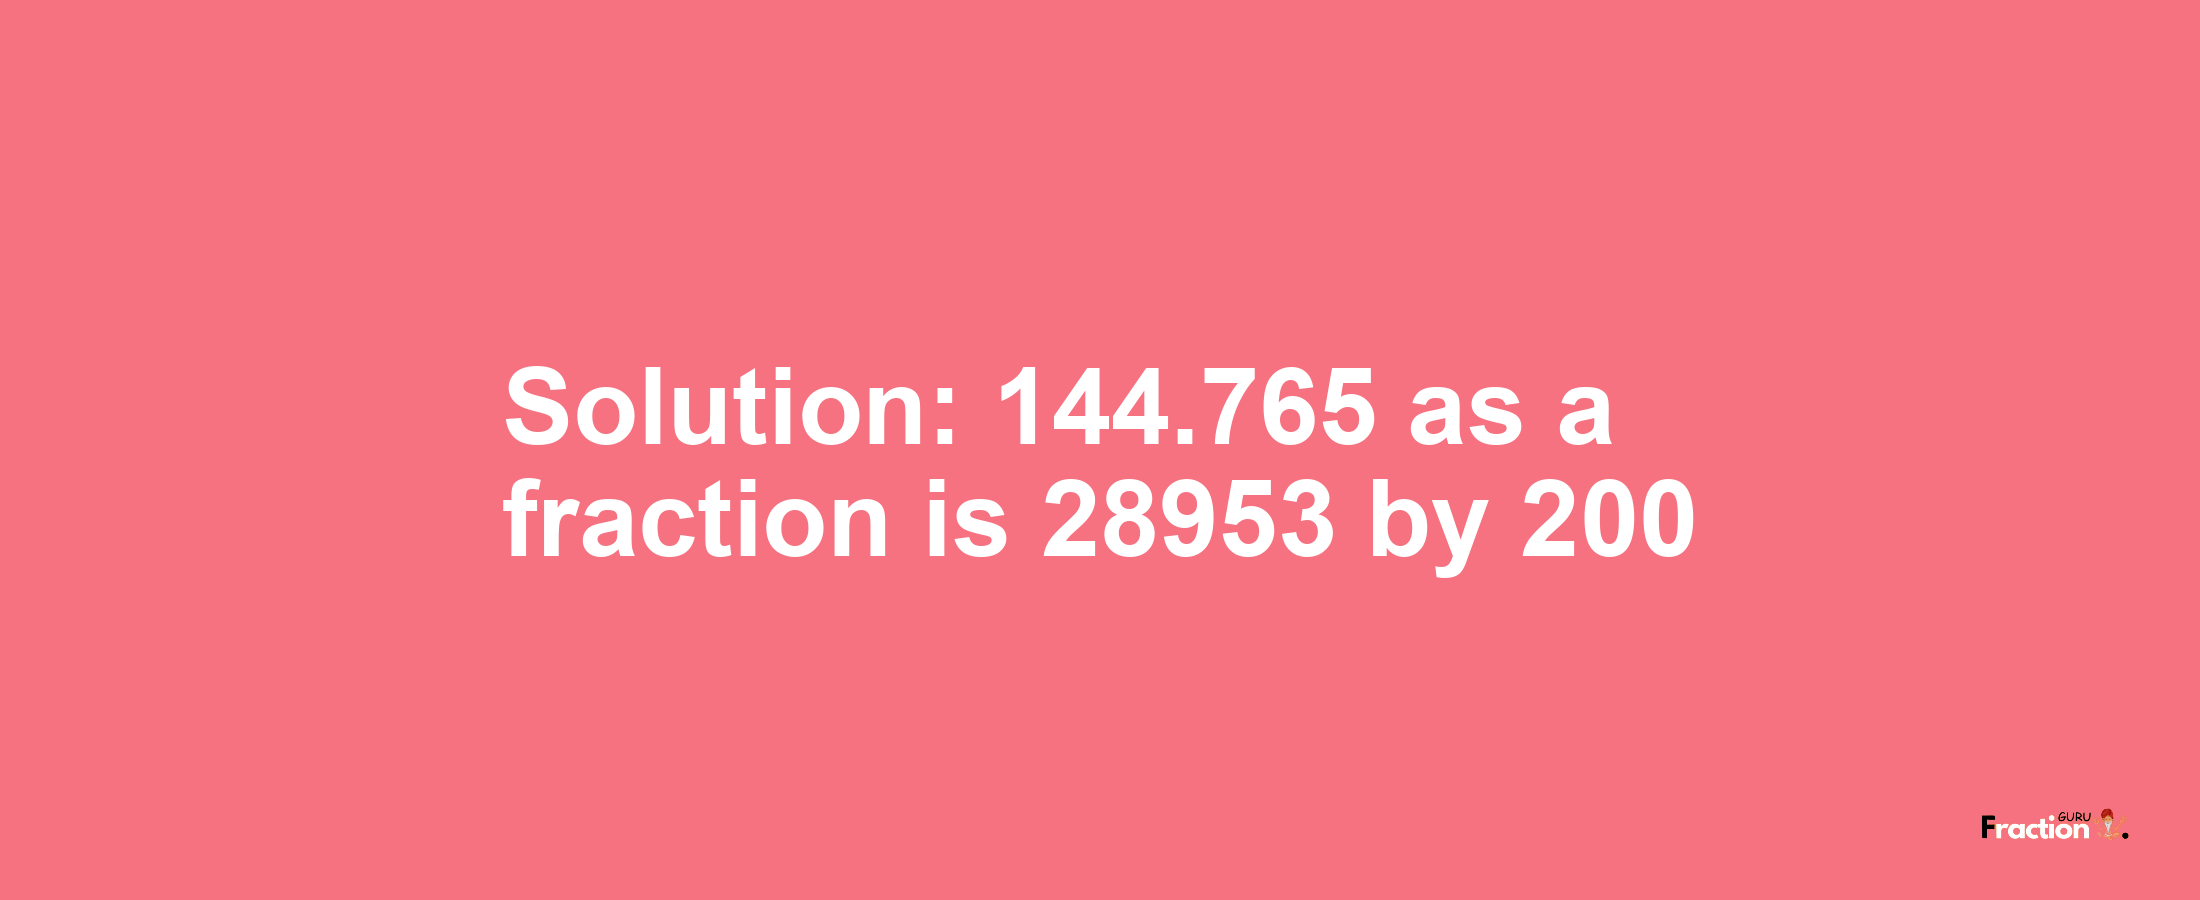 Solution:144.765 as a fraction is 28953/200